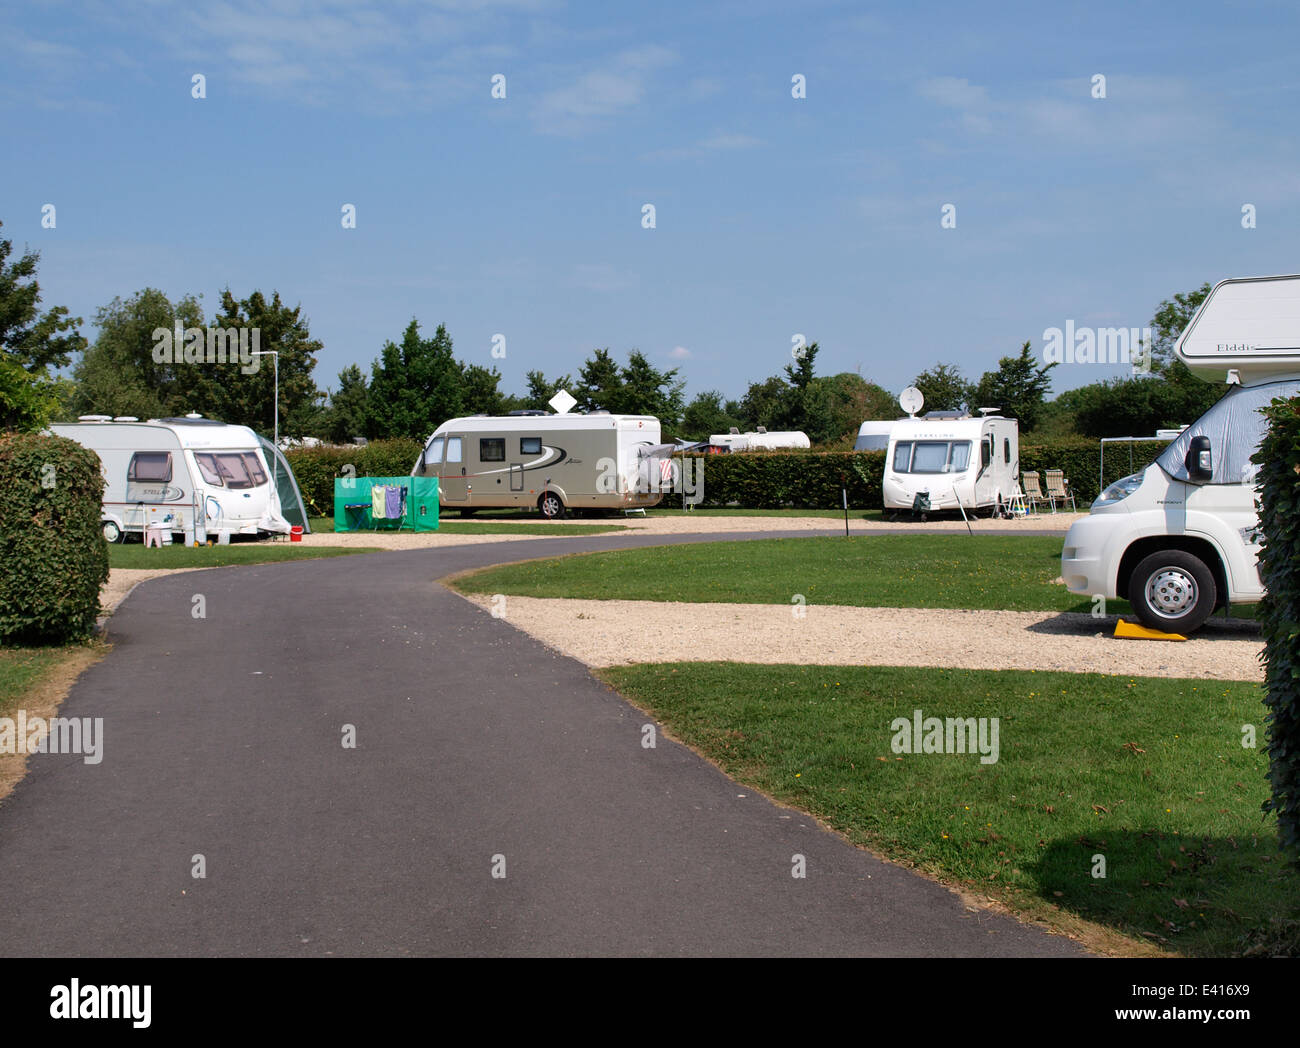 The Camping and Caravanning club site at Seend, Melksham, Wiltshire, UK Stock Photo